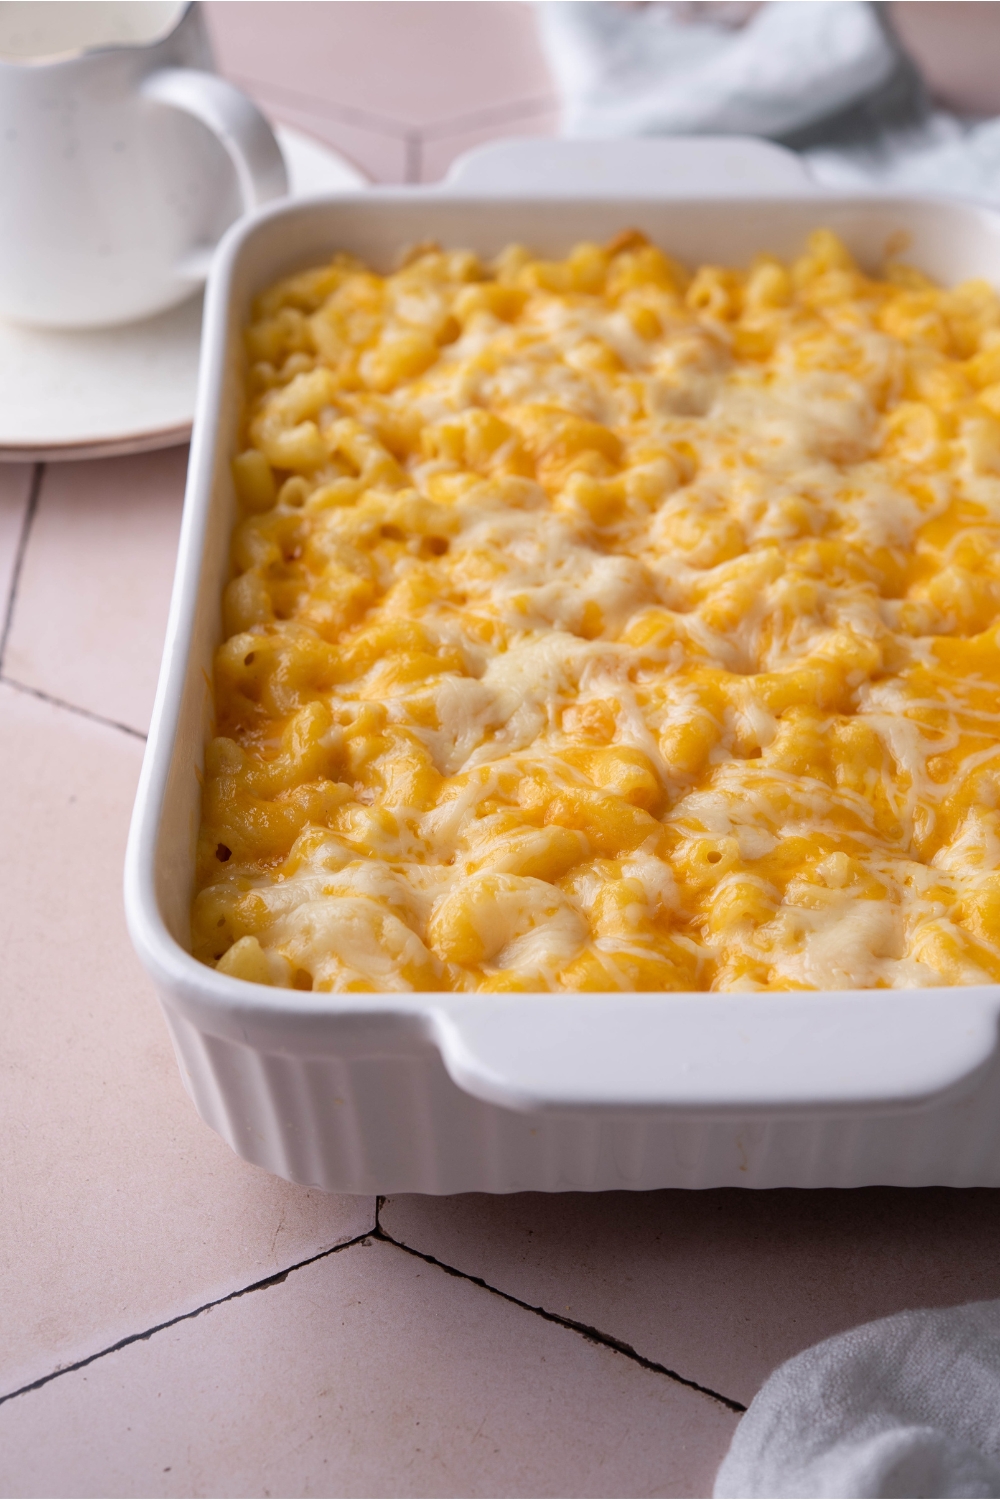 A white baking dish filled with baked Chick Fil A macaroni and cheese.